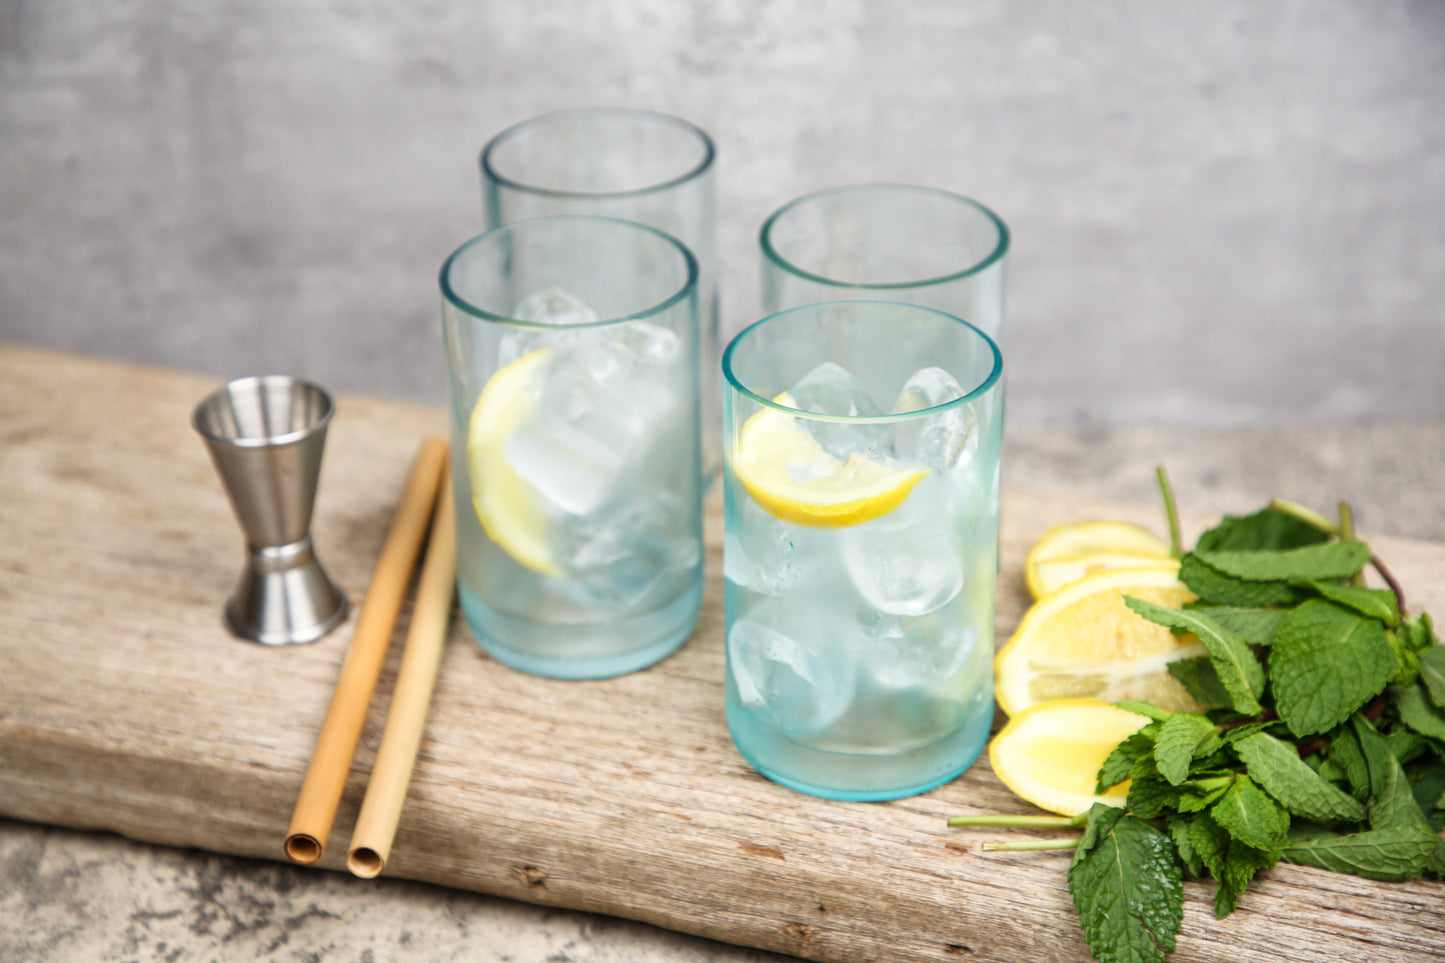 Set of Four Everyday Light Teal Tumblers